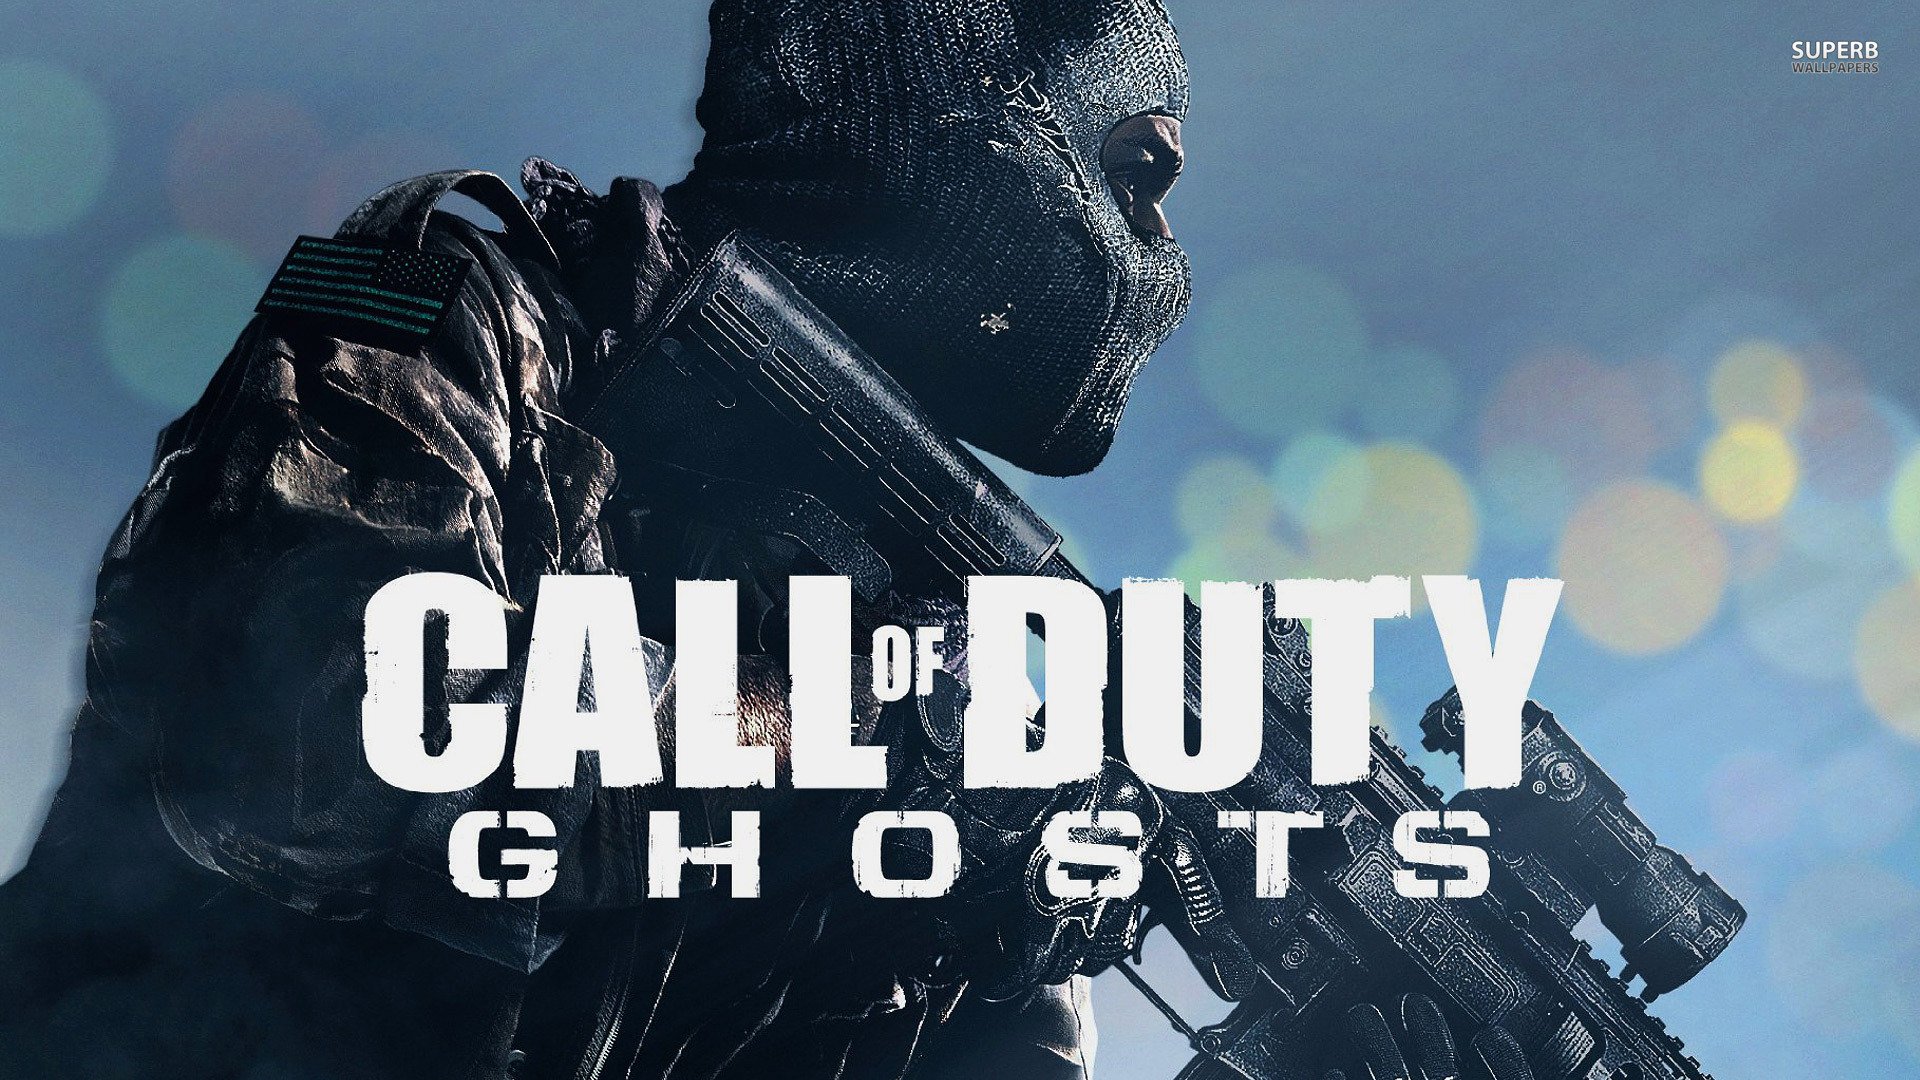 Cool of duty. Call of Duty: Ghosts. Гоуст Call of Duty. Call of Duty Ghosts призраки. Call of Duty Ghosts гоуст.